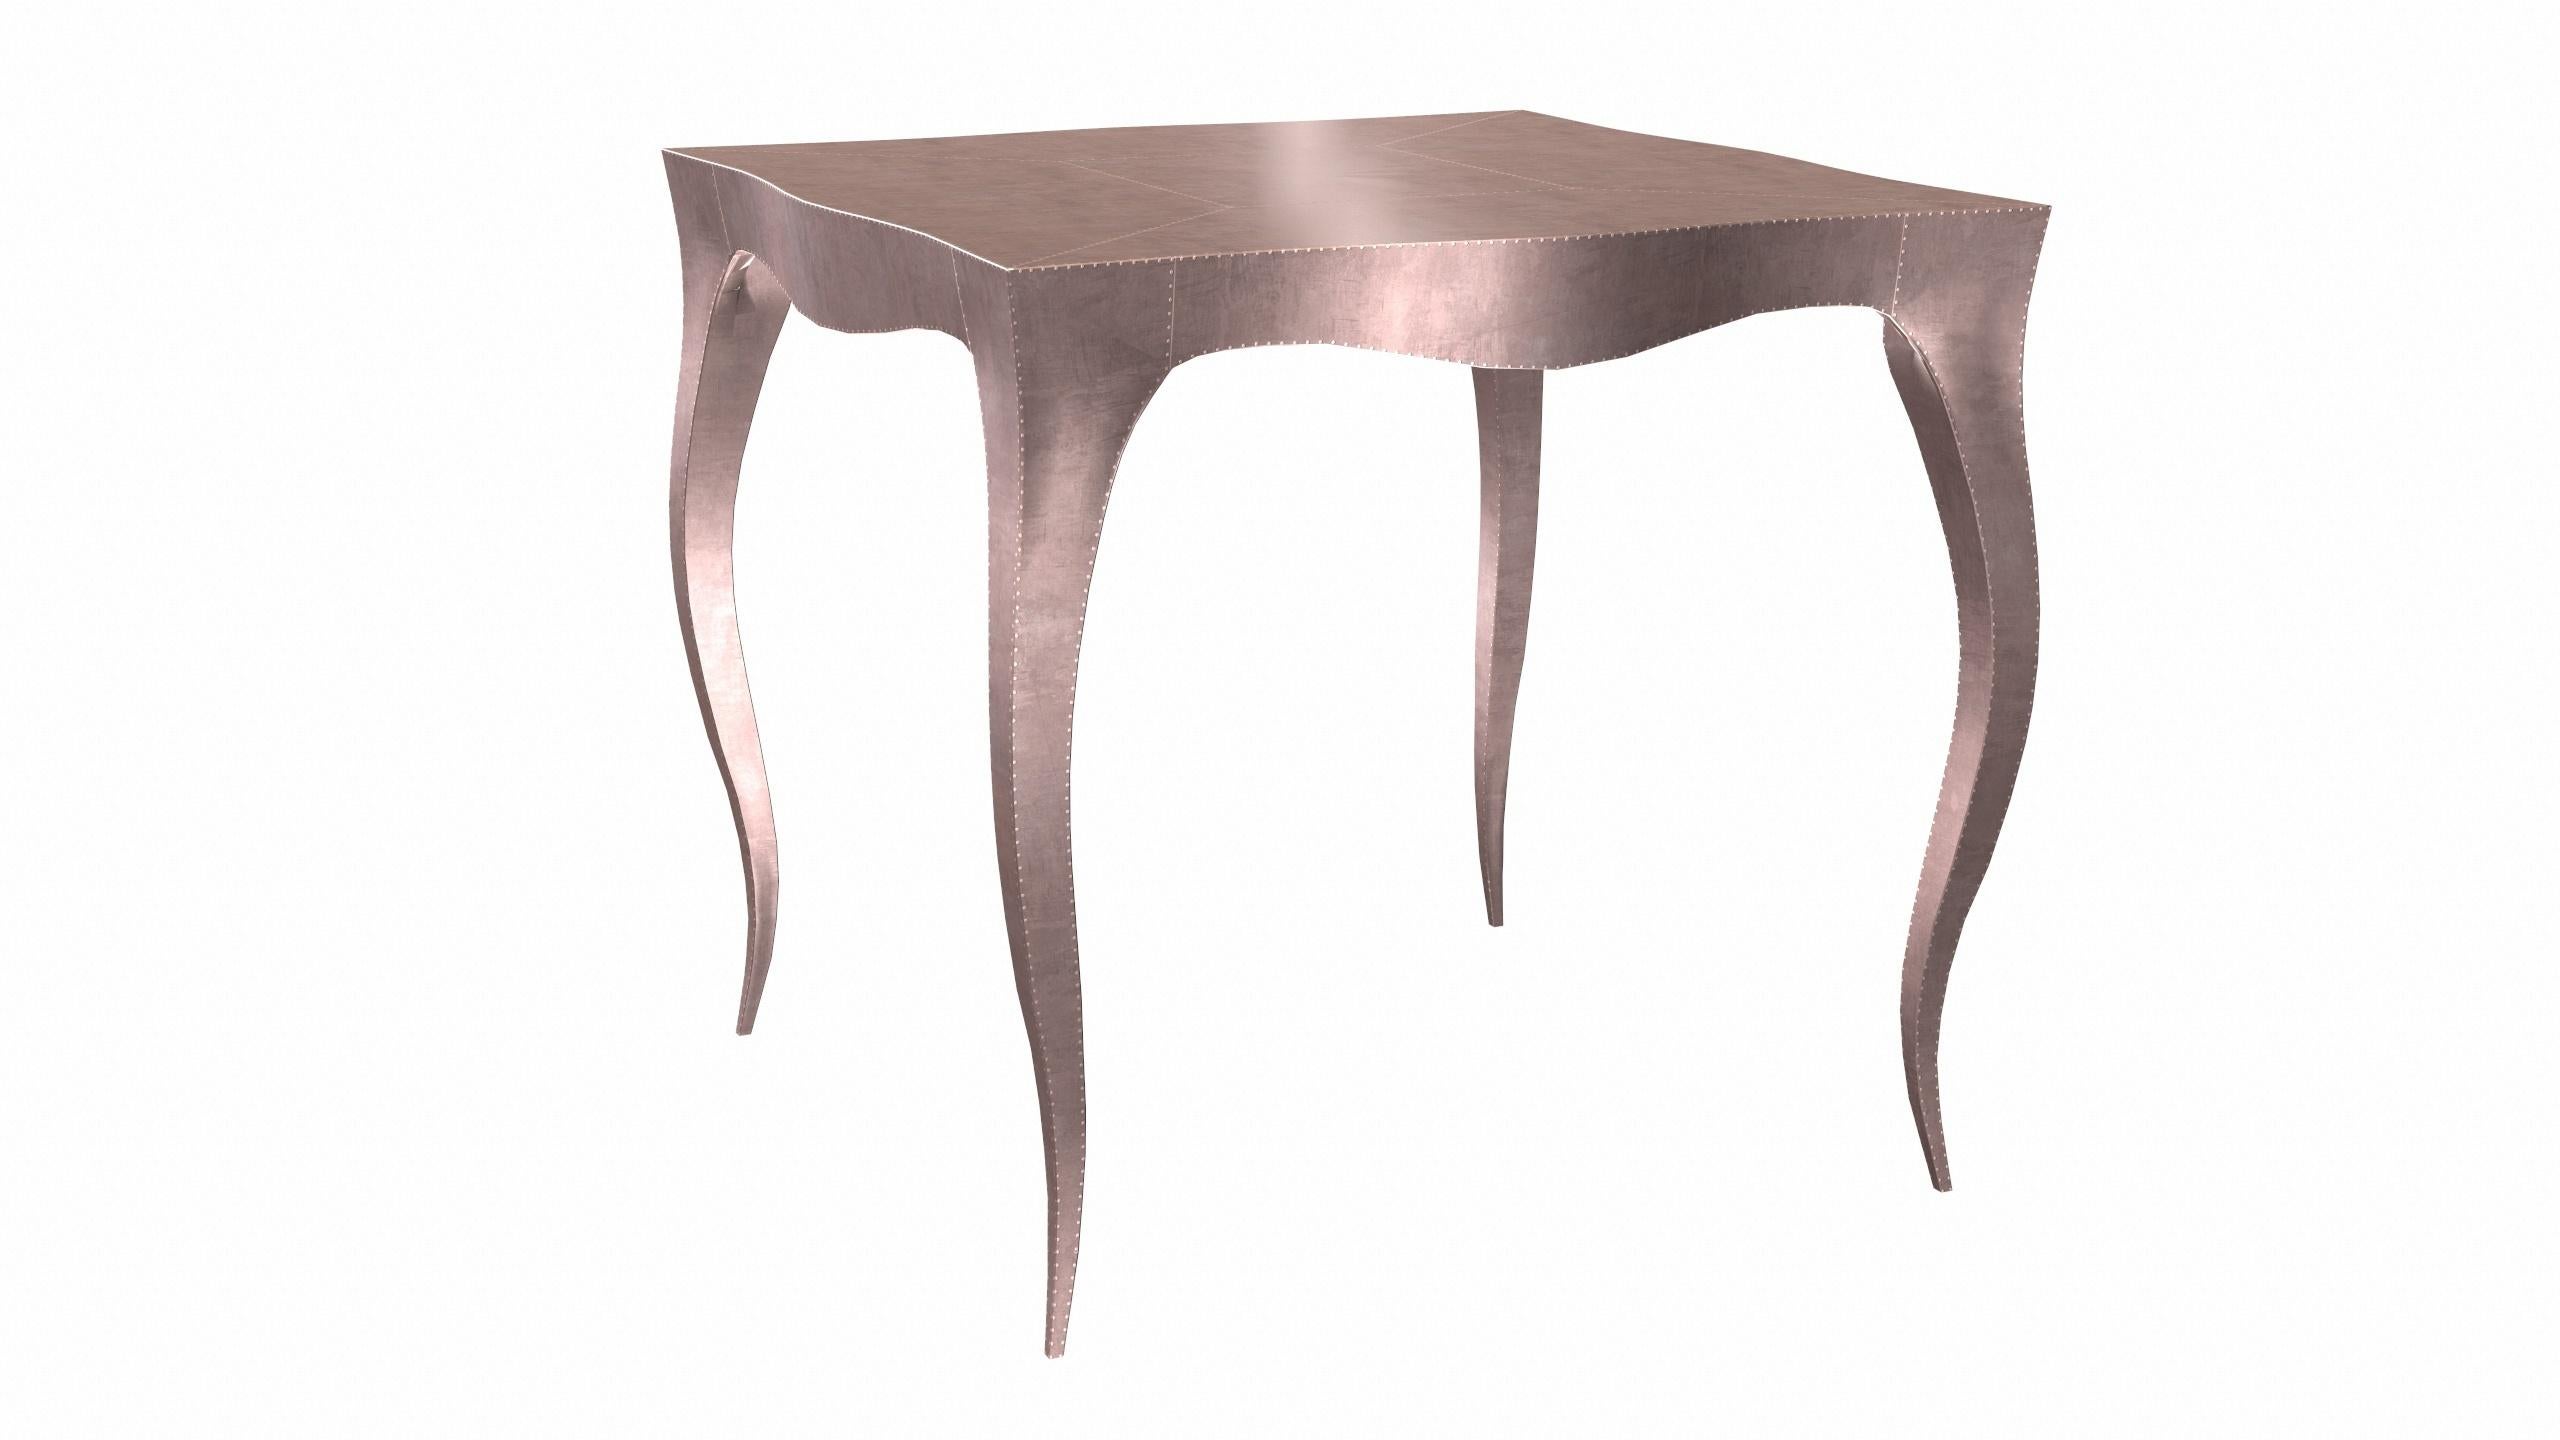 Hand-Carved Louise Art Deco Nesting Tables and Stacking Tables Smooth Copper by Paul Mathieu For Sale